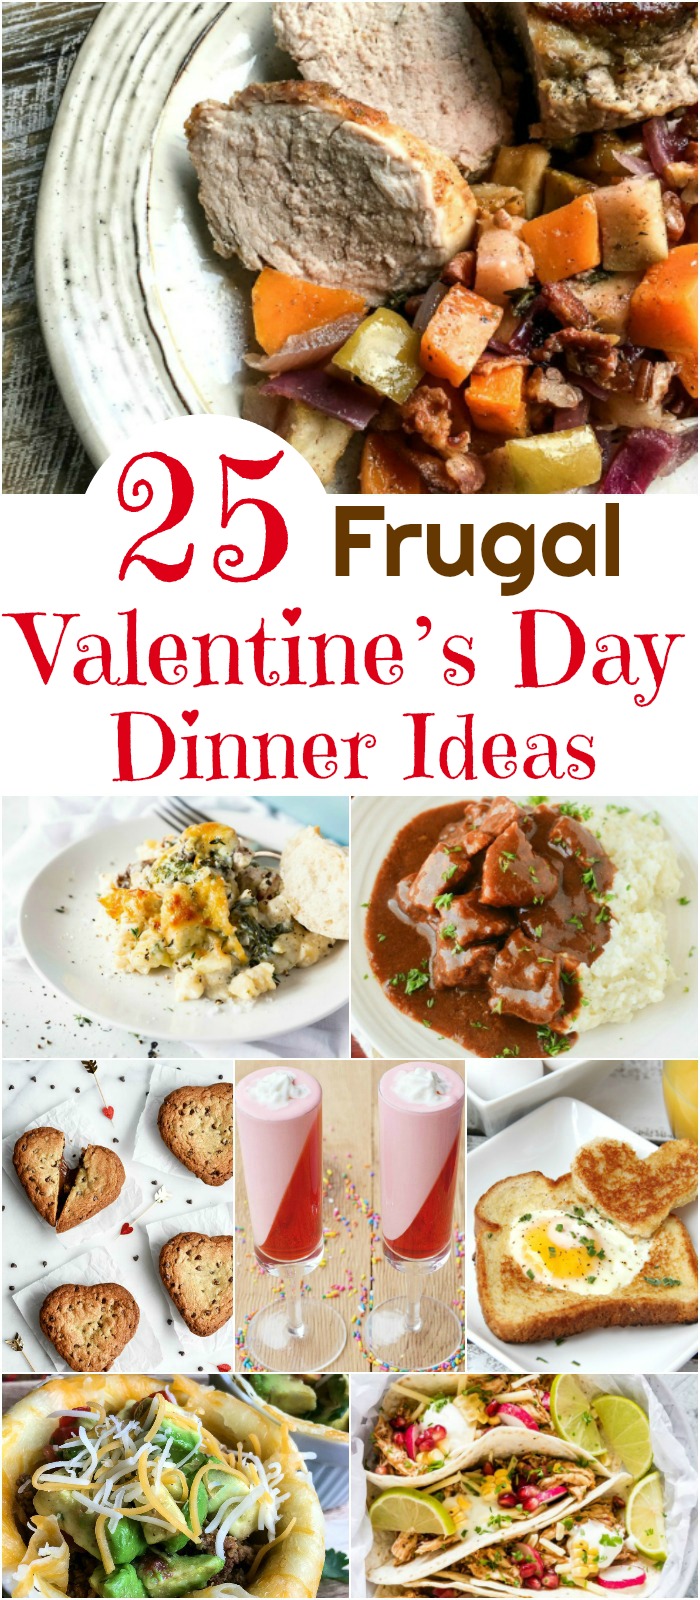 25 Frugal Valentine's Day Dinner Ideas Your Sweetie Will Love - It's ...